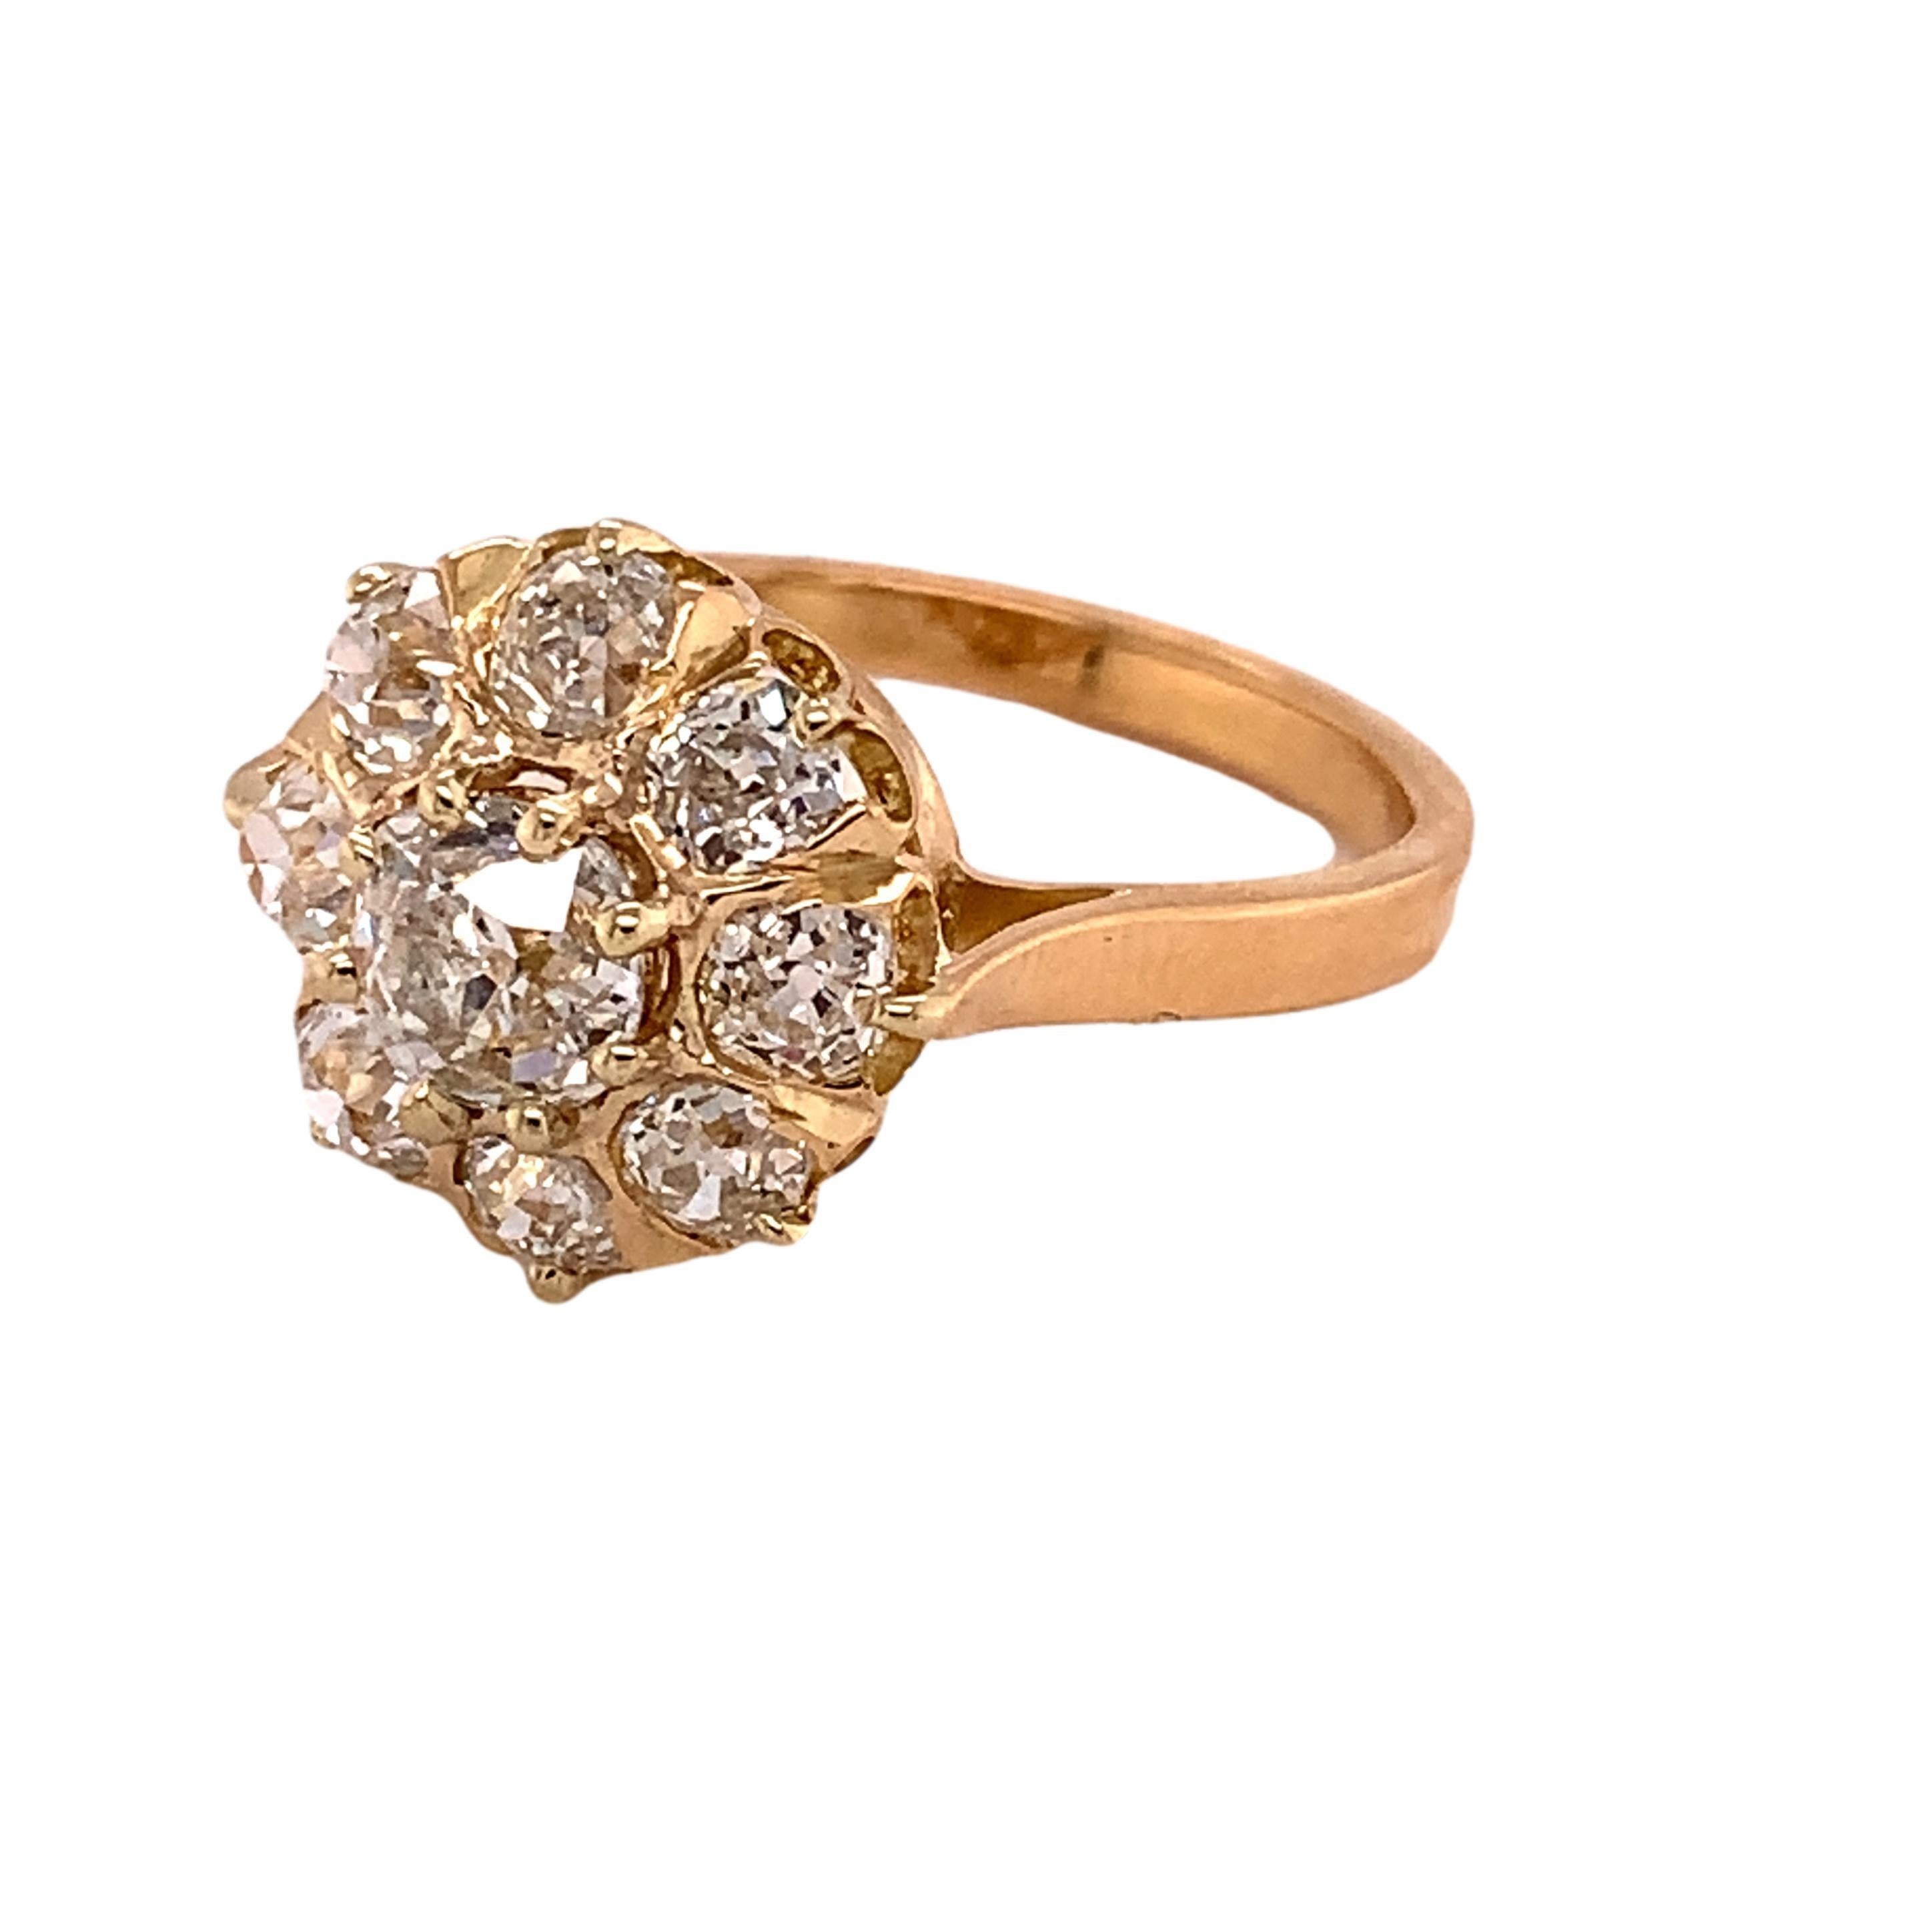 18k Gold Victorian Mine Cut Genuine Natural Diamond Ring 2.48 Carats TW (#J4894)

18k yellow gold Victorian diamond ring with 2.48 carats total weight of antique mine cut diamonds c1870-1880s. The center diamond weighs .88cts with H color and SI2